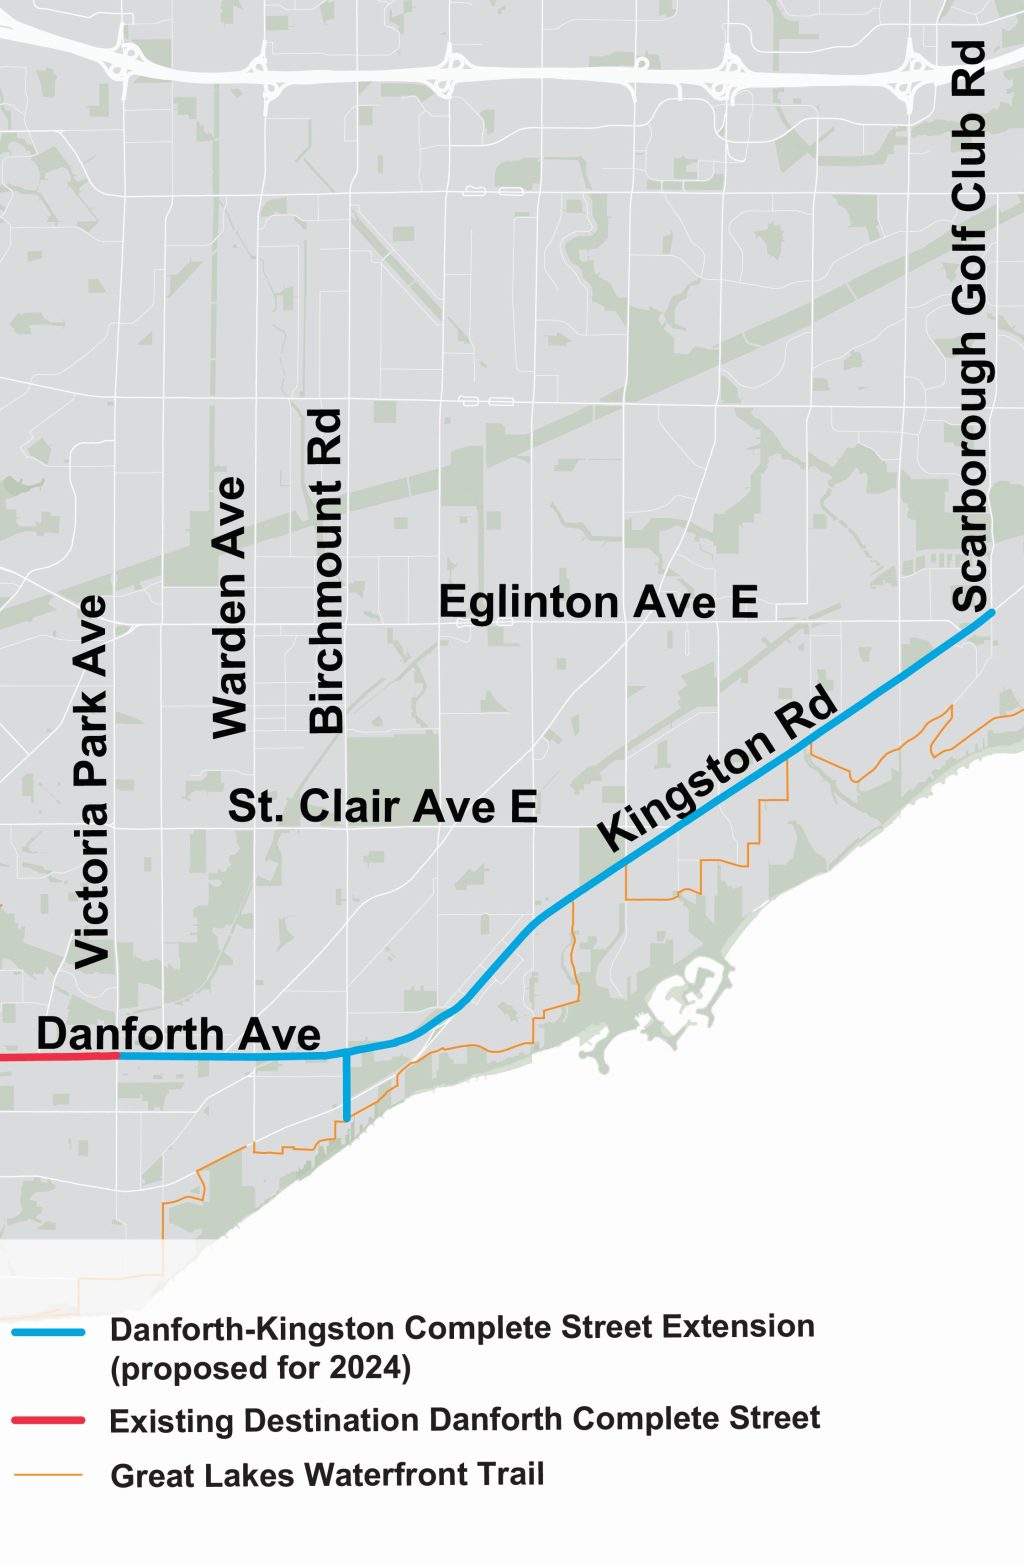 Map of proposed Danforth-Kingston Complete Street Extension, in addition to the existing Destination Danforth Complete Street and Great Lakes Waterfront Trail